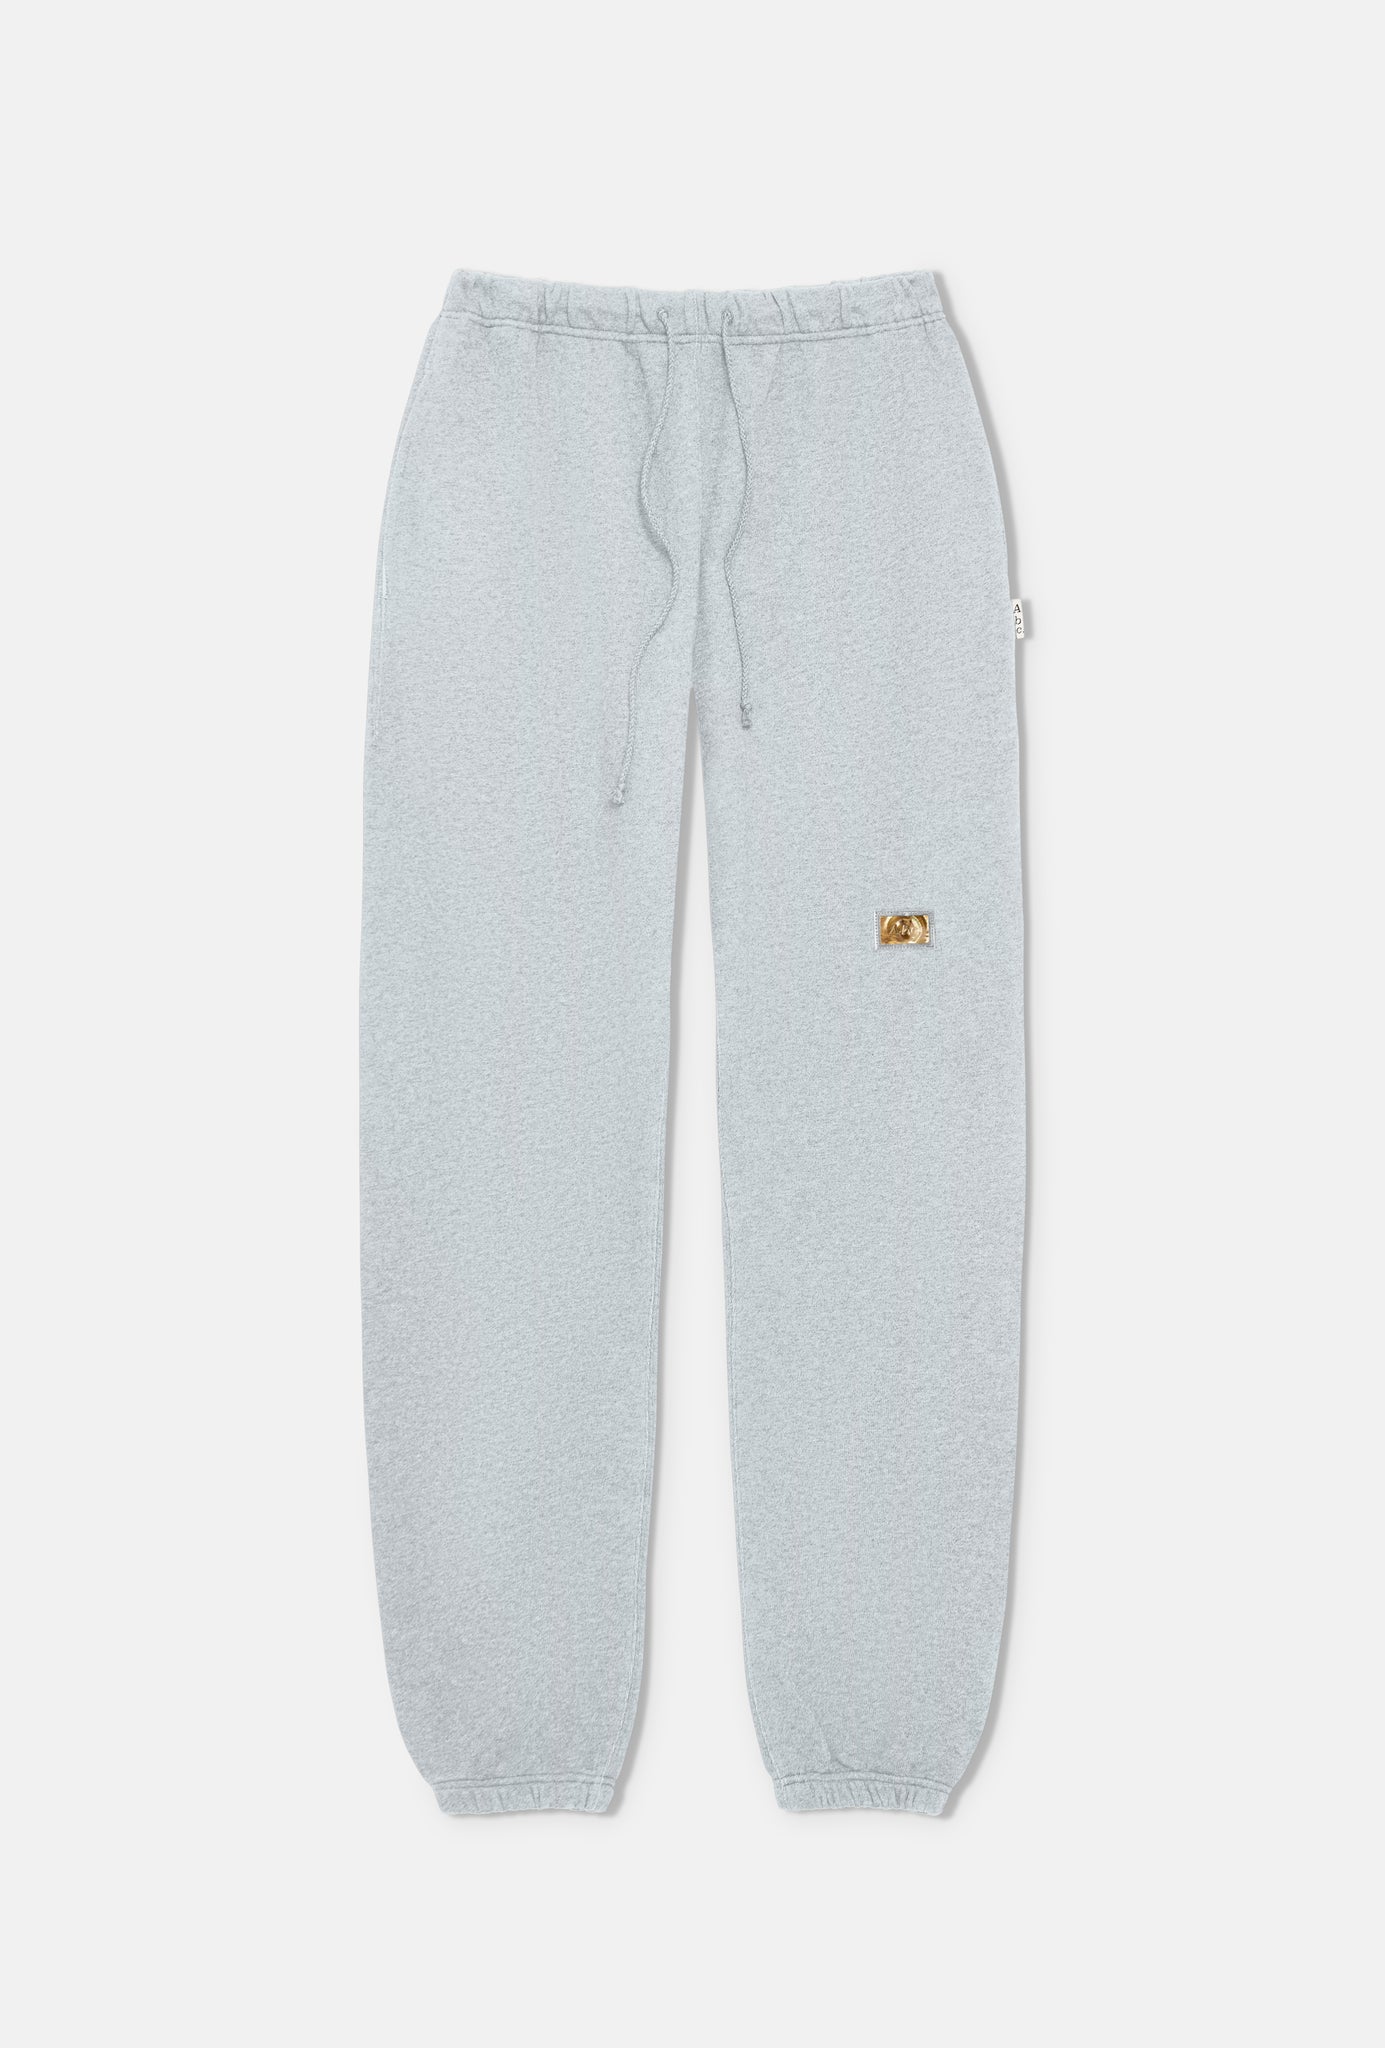 Abc. 123 Hologram French Terry Sweatpants (SS24)- Blue